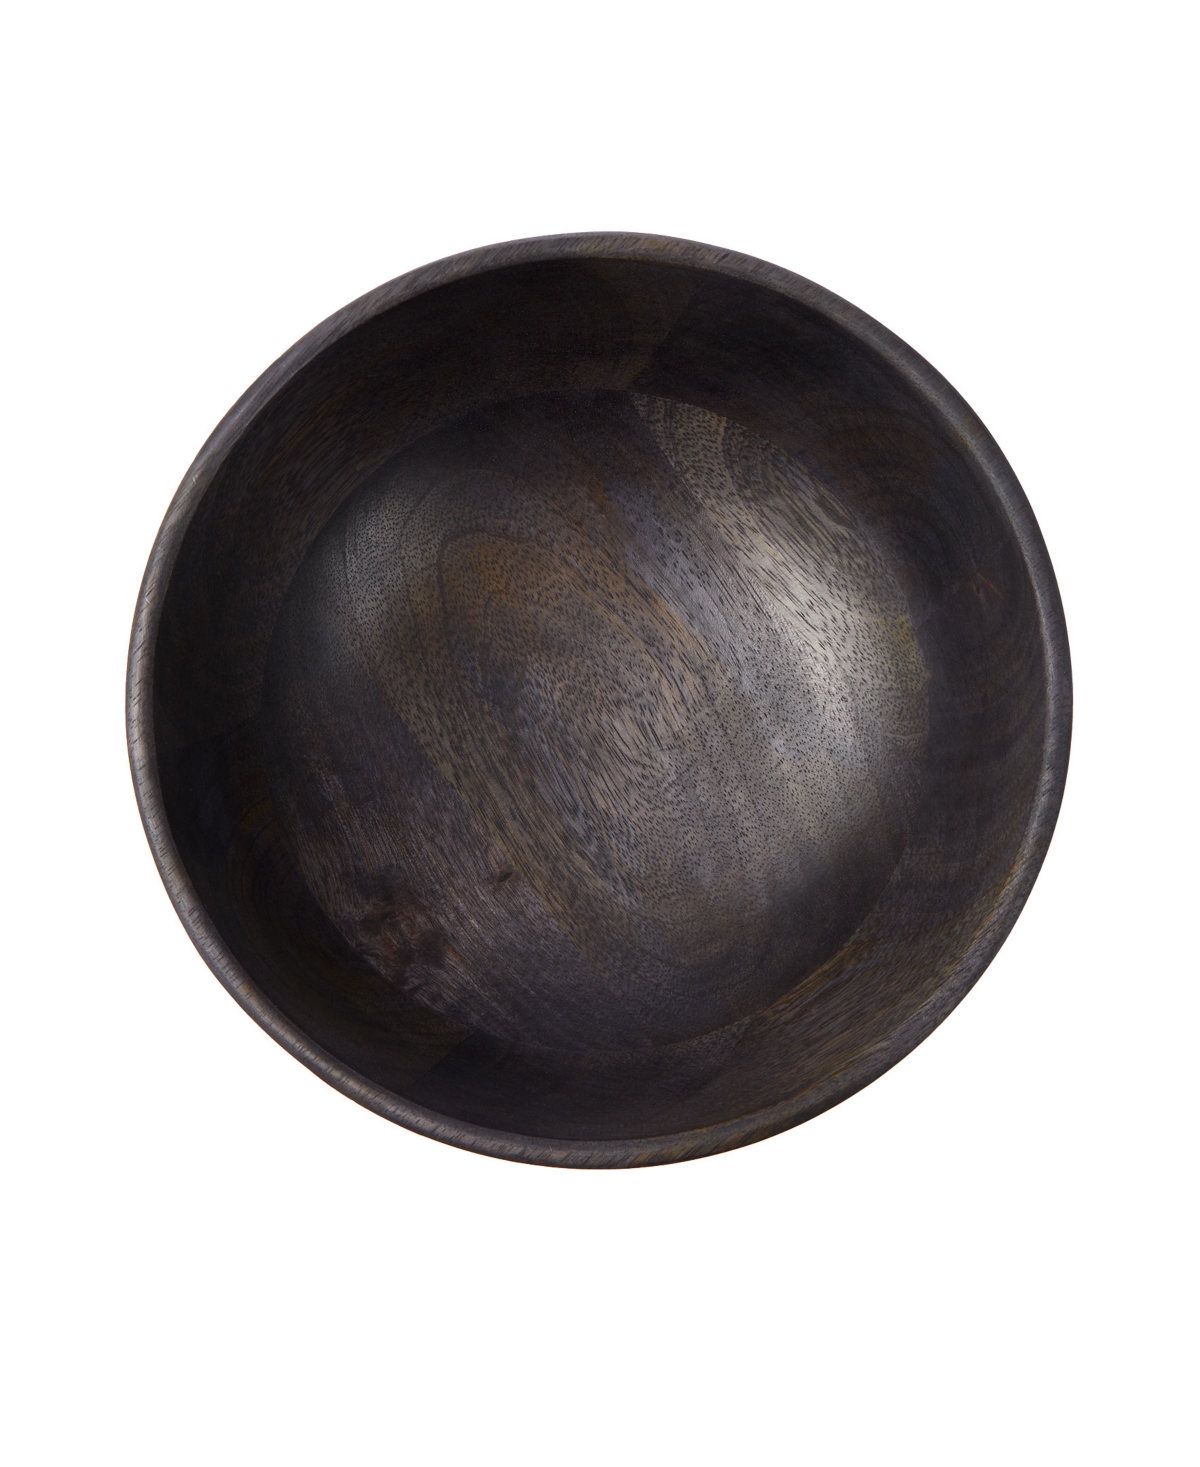 Shop Godinger Signature Collection Acacia Small Wood Bowl With Metal Studs In Black